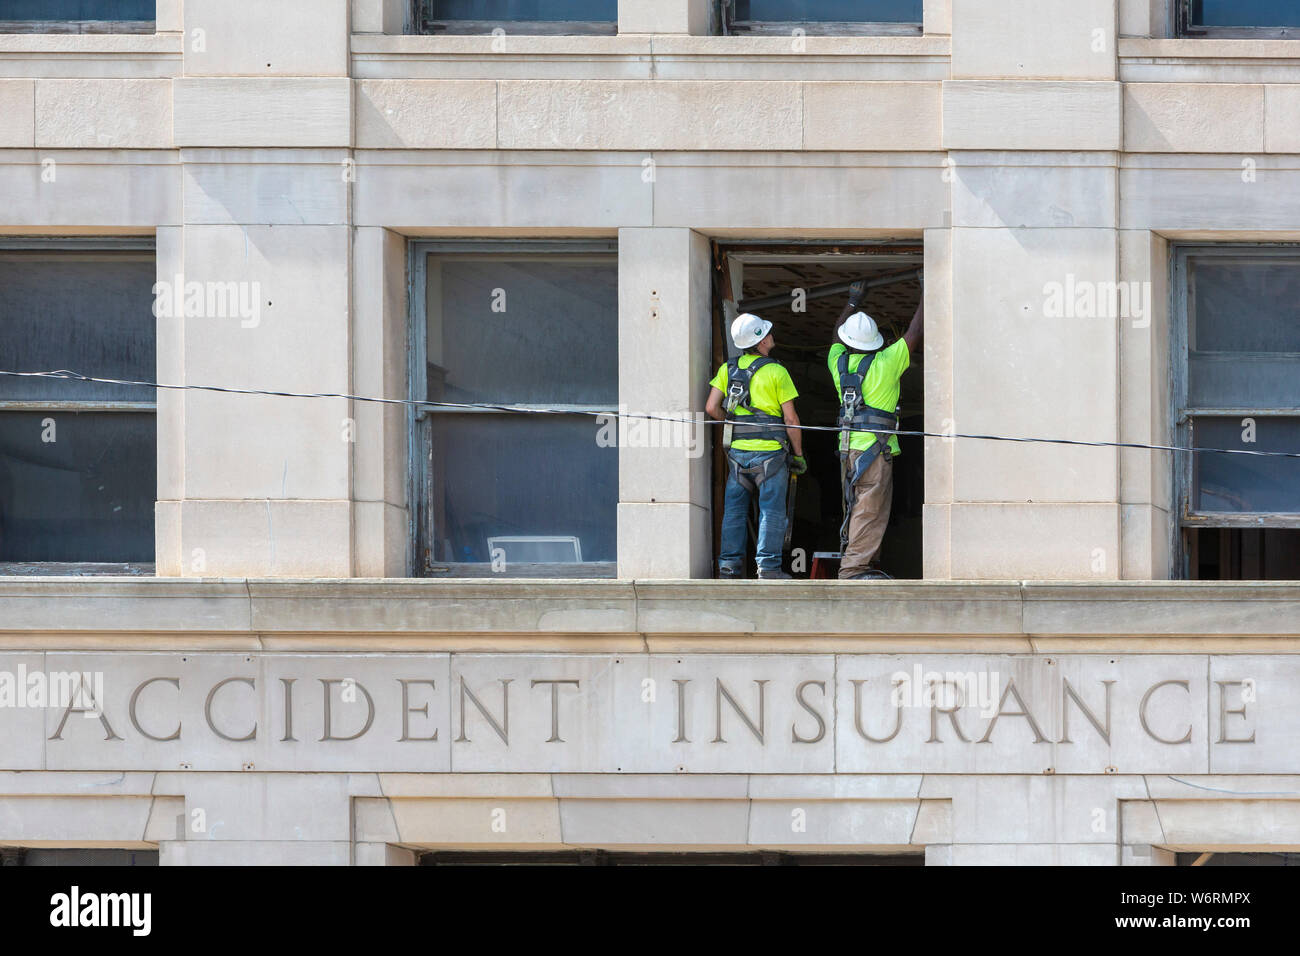 Detroit, Michigan - Two construction workers on a ledge on the third floor of the Standard Accident Insurance Company building. Built in 1920, the str Stock Photo